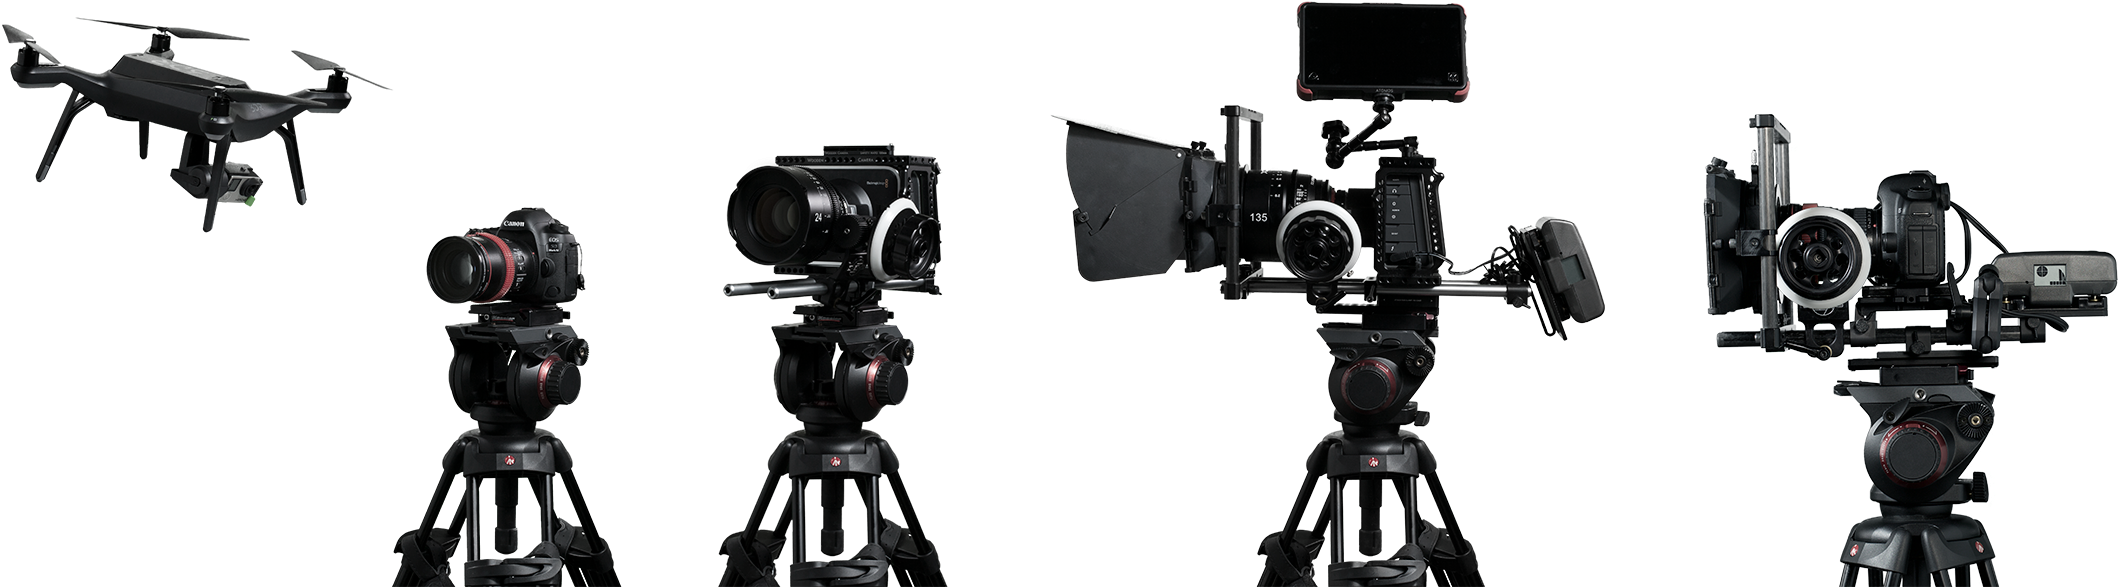 Professional Video Production Equipment Lineup PNG